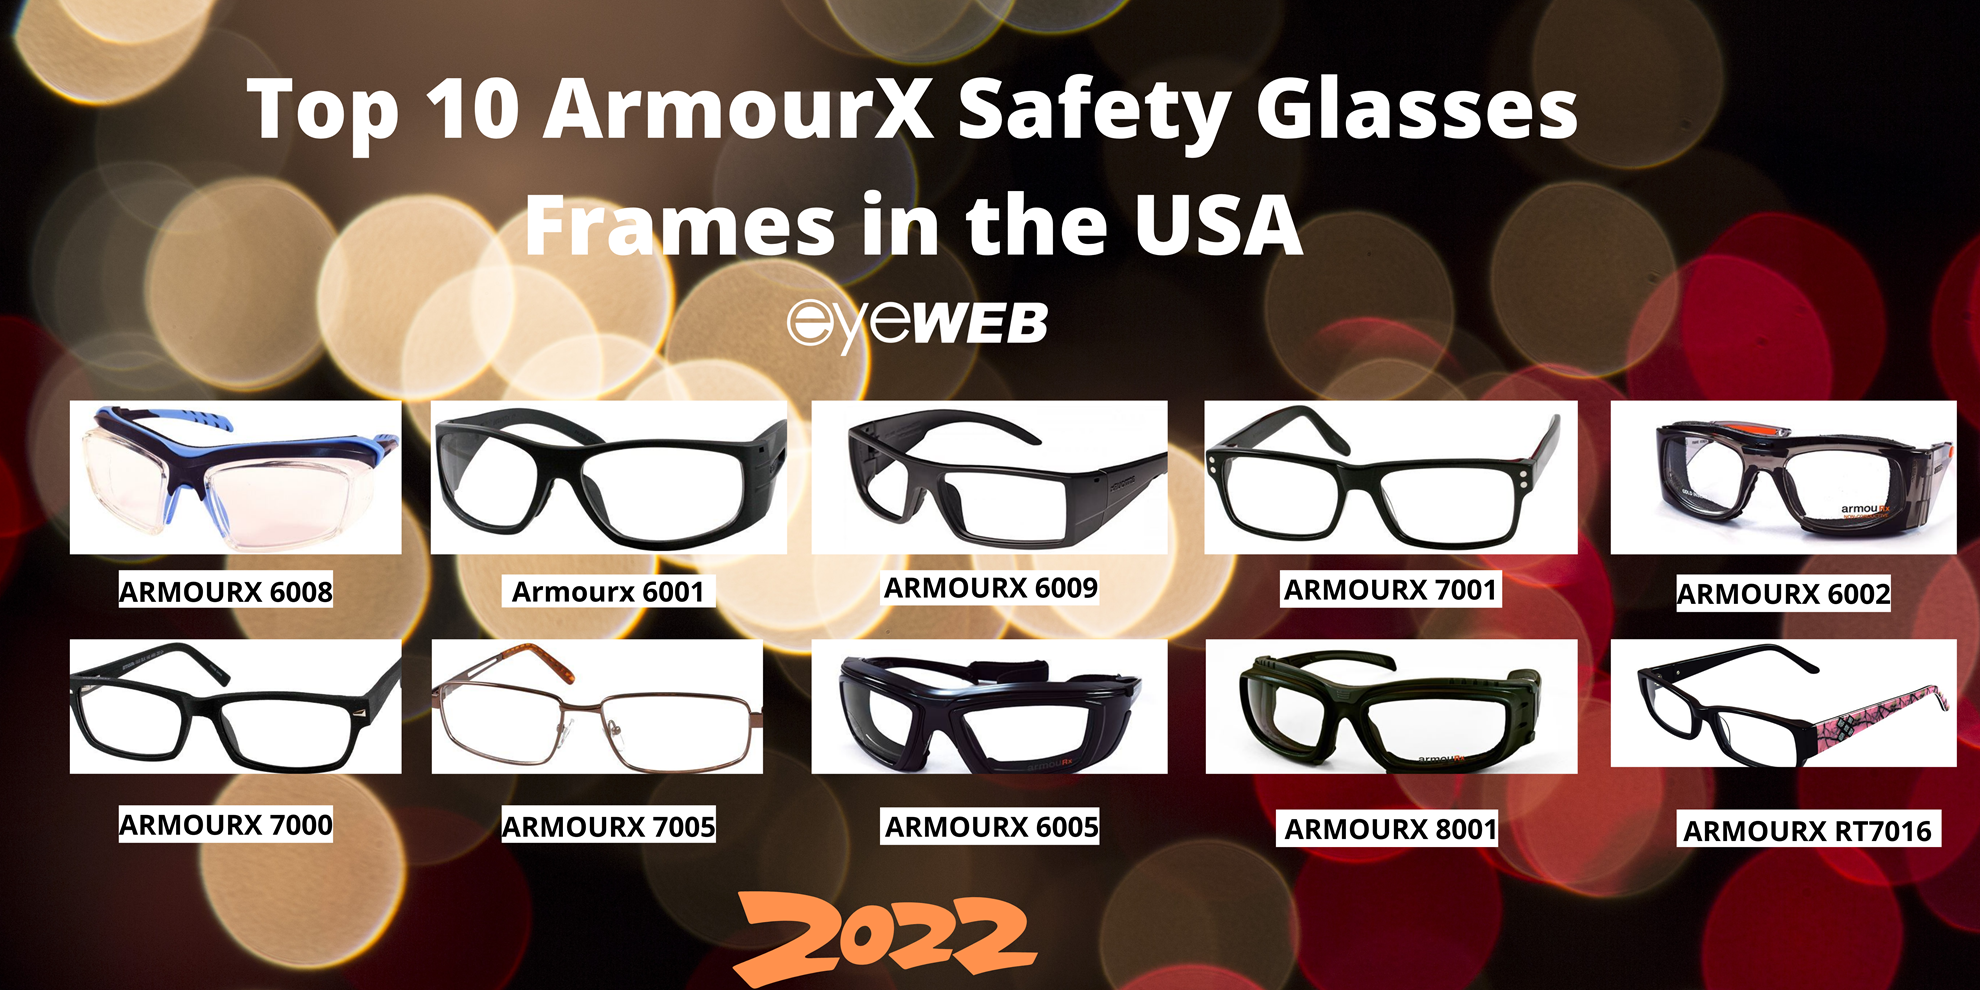 Armourx 7106 Safety Glasses Full Rimmed Frames in Round Shape from Eyeweb 